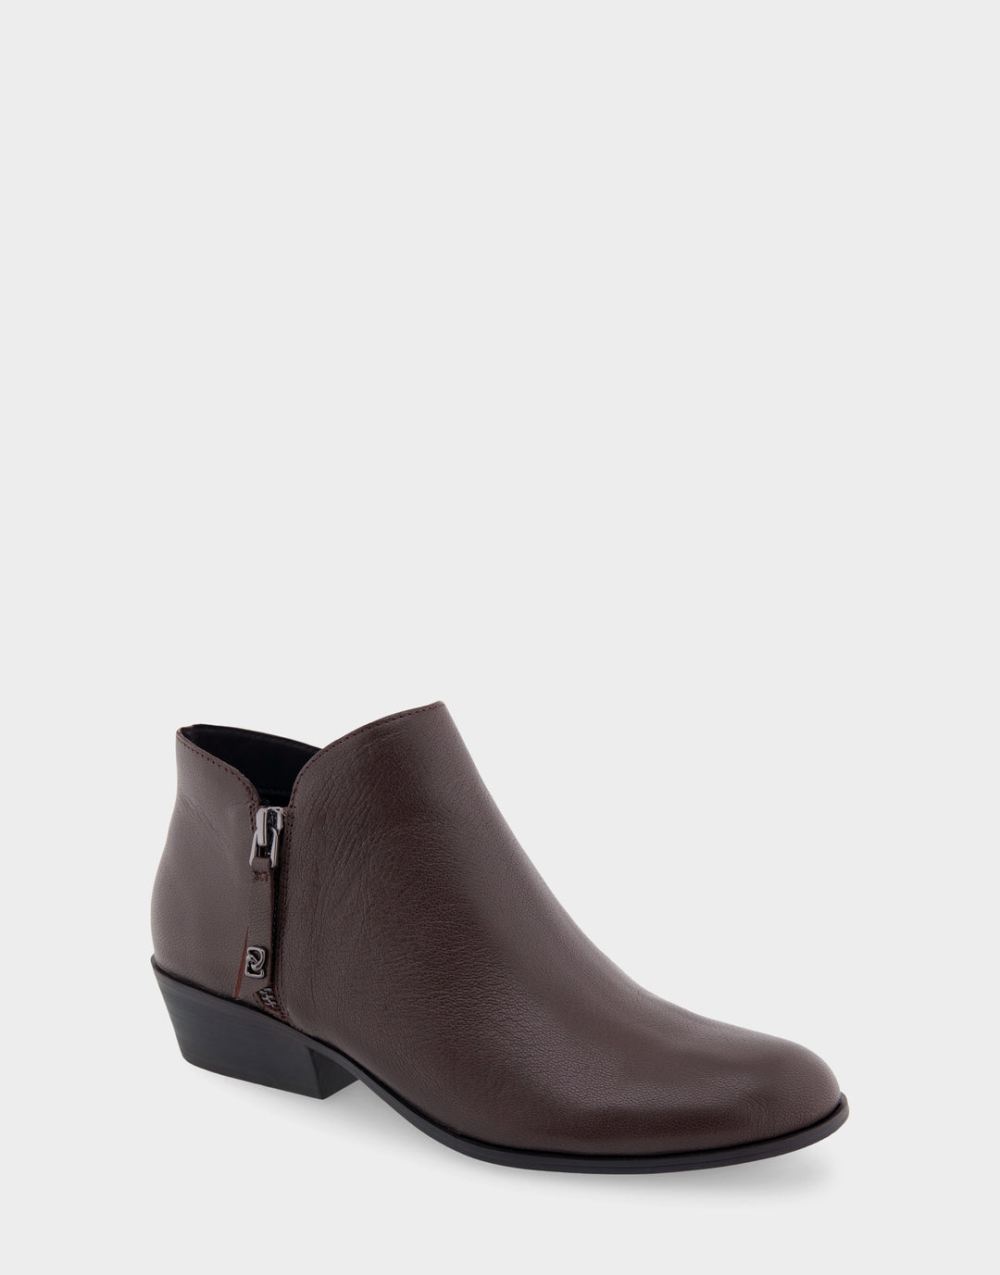 Women's | Collaroy Java Genuine Leather Ankle Boot